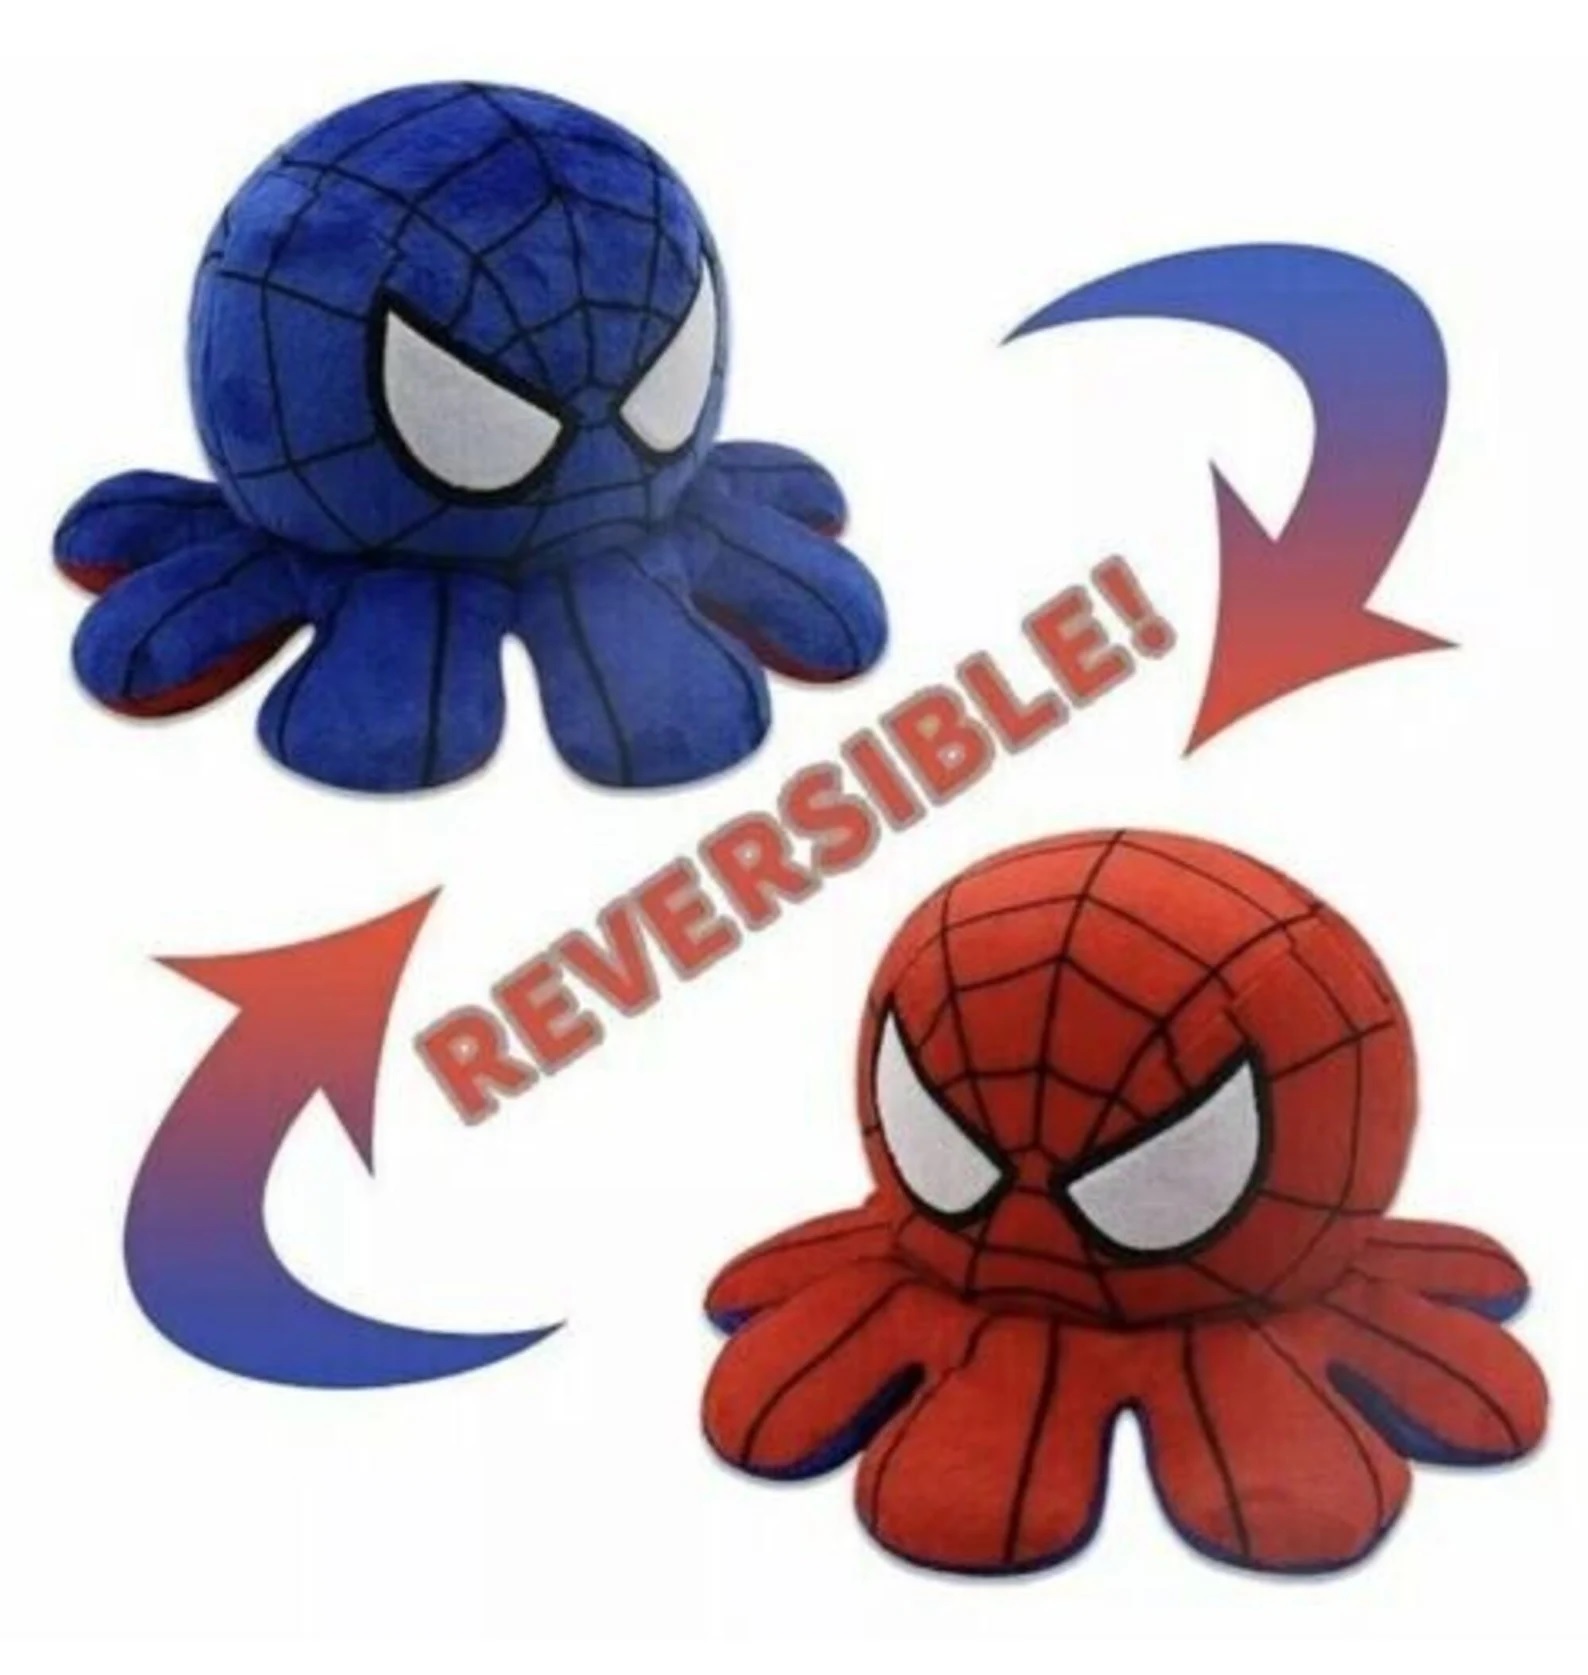 An octopus plushie designed to look like Spider-Man. It can be reversed to be either red or blue